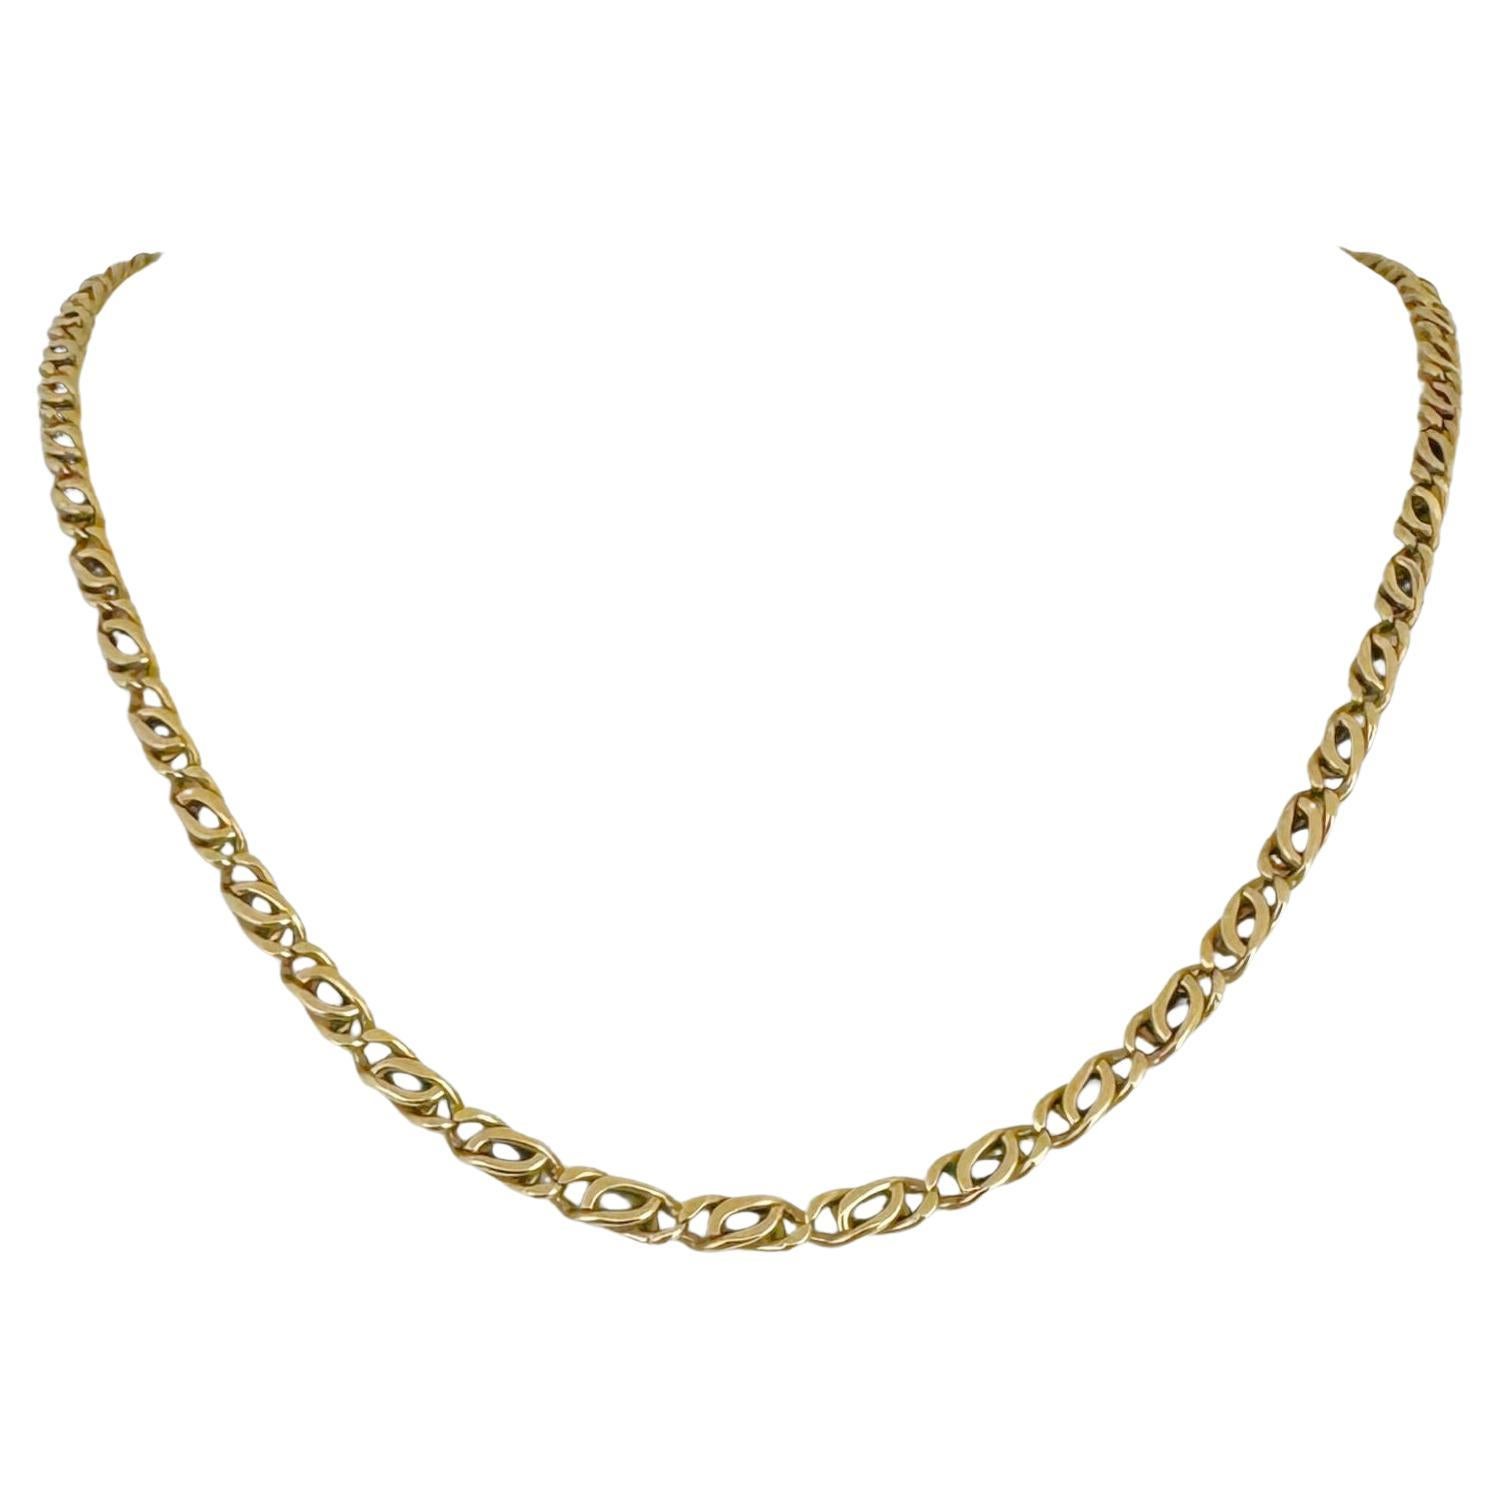 14 Karat Yellow Gold Solid Fancy Curb Link Chain Necklace 